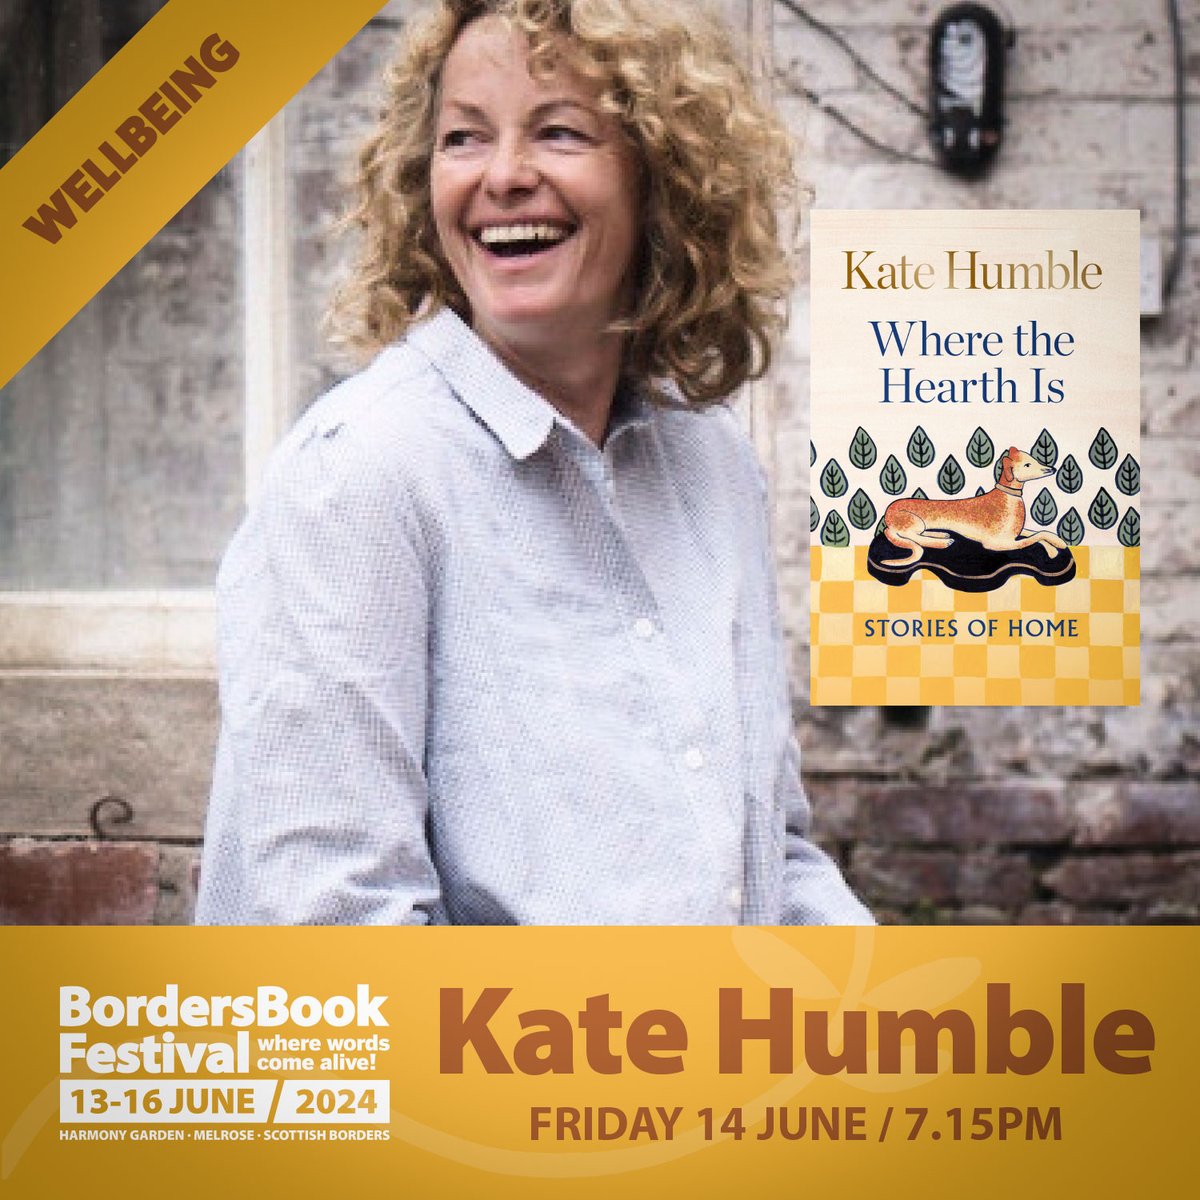 Feeling happy, healthy, productive and content in our homes – be they castles or caravans, flat-shares or farms is more important than ever as post-Covid society changes the way we work and live. TICKETS: tikt.link/katehum WEBSITE: bordersbookfestival.org